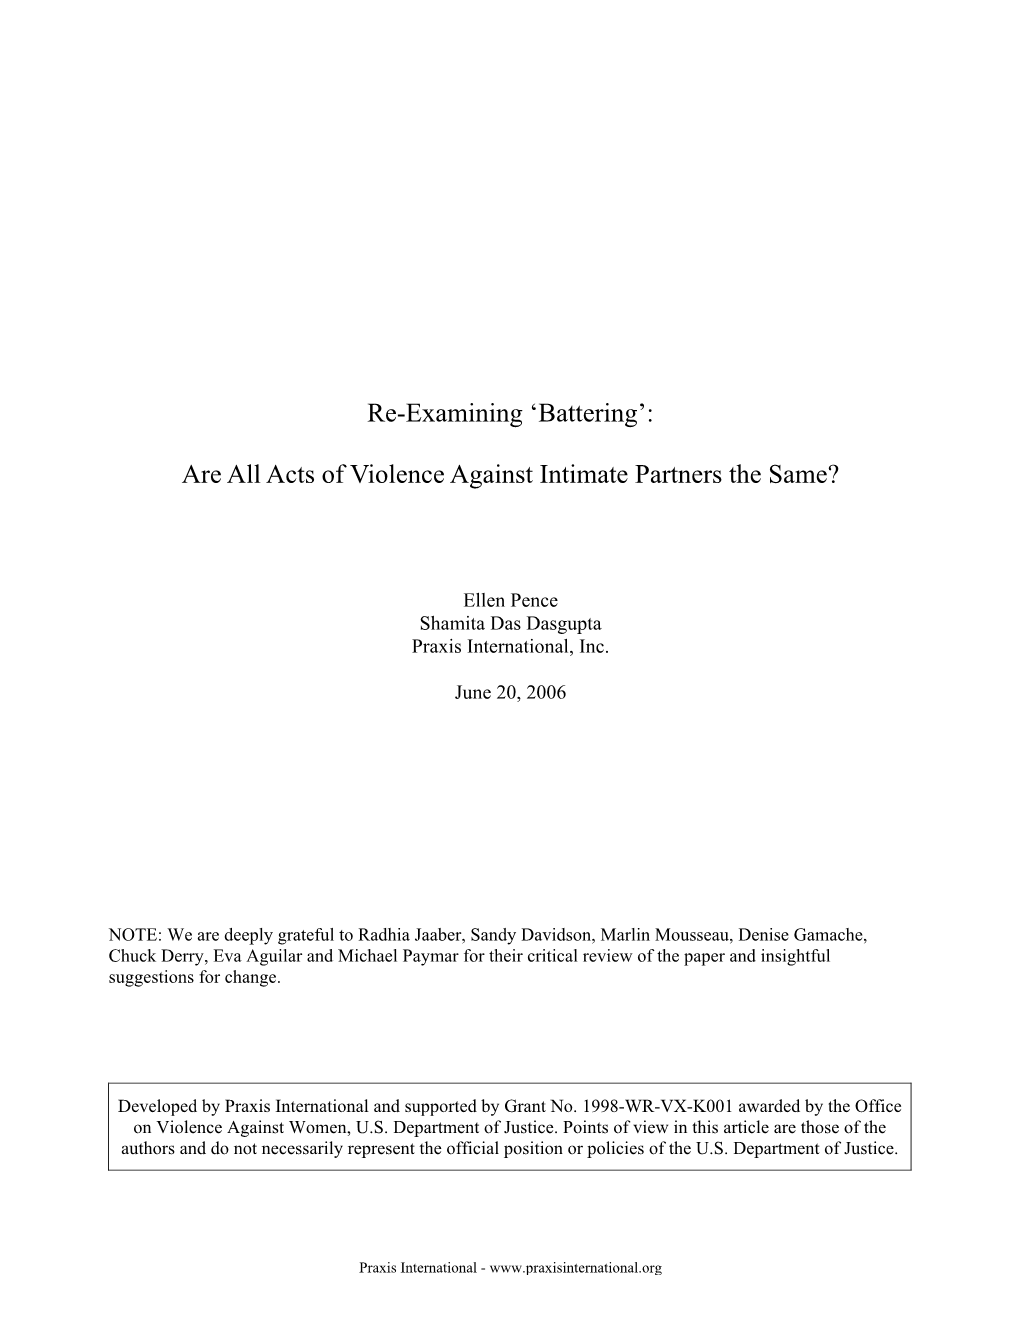 'Battering': Are All Acts of Violence Against Intimate Partners the Same?